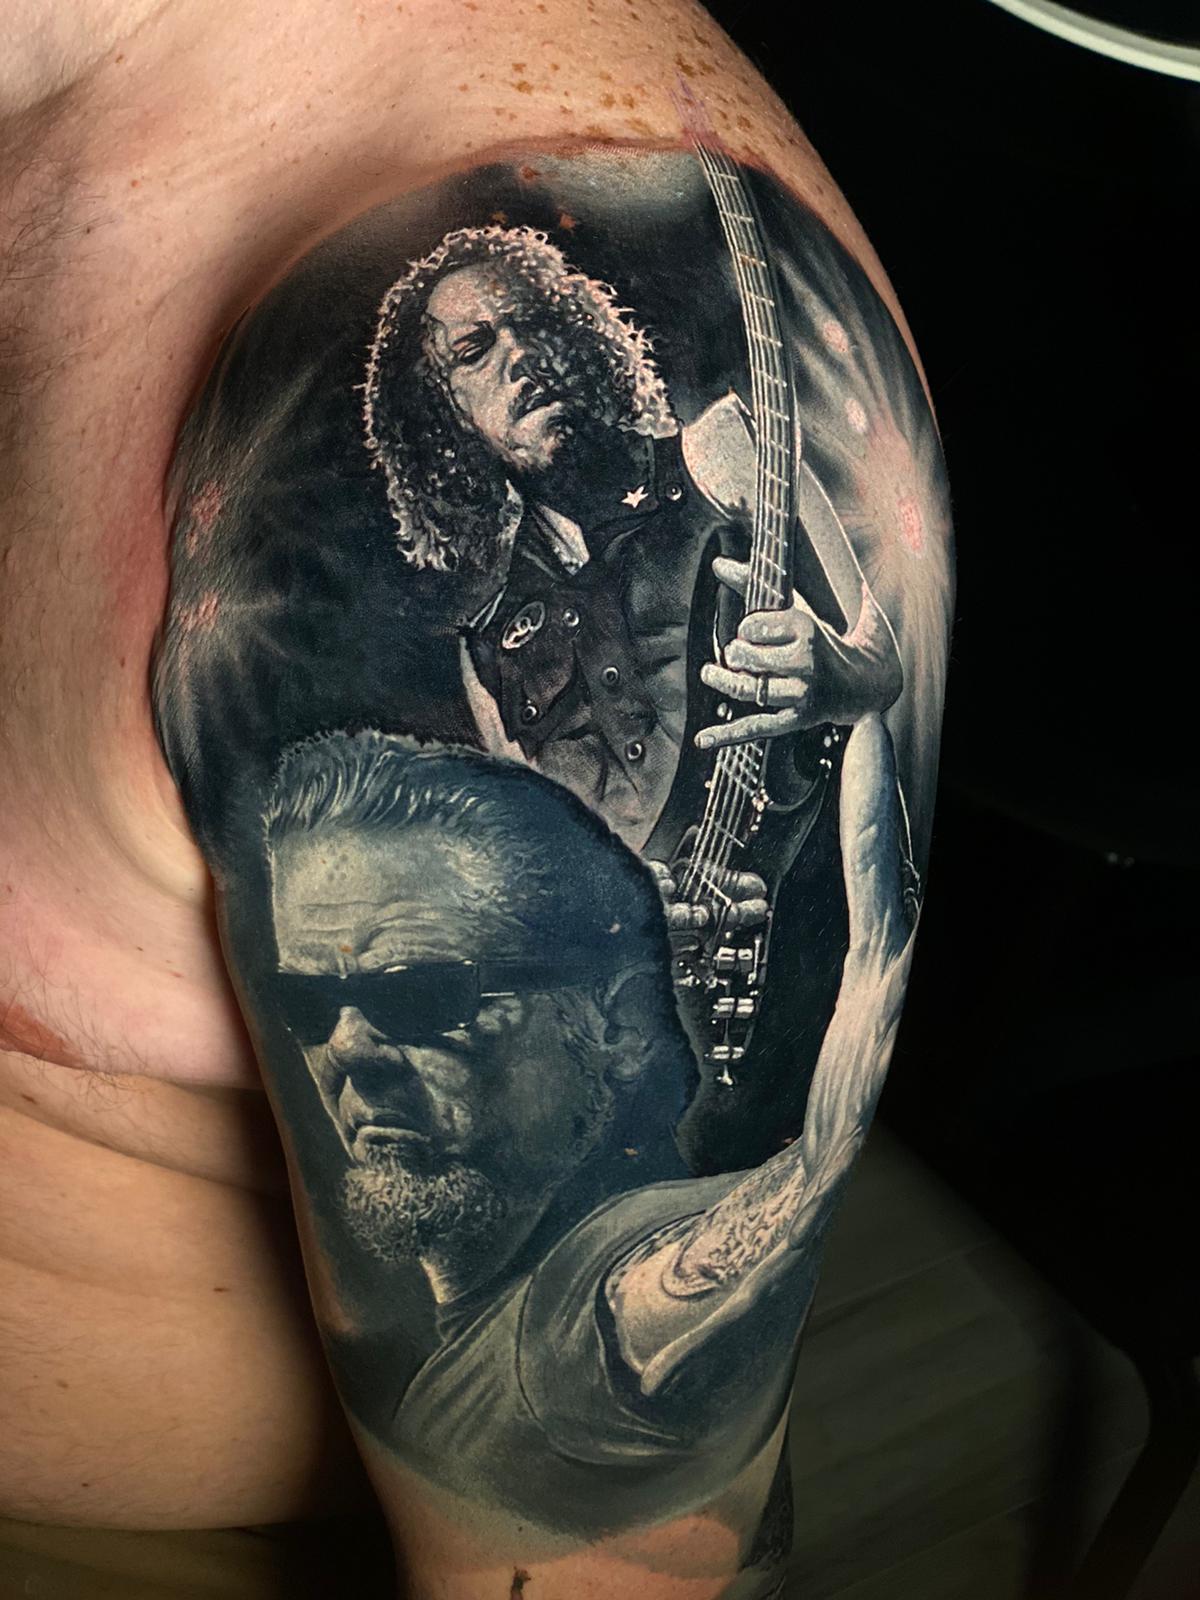 Cute Slipknot tattoo all the way in the UK   Instagram post from Sean  Solomon foreversean